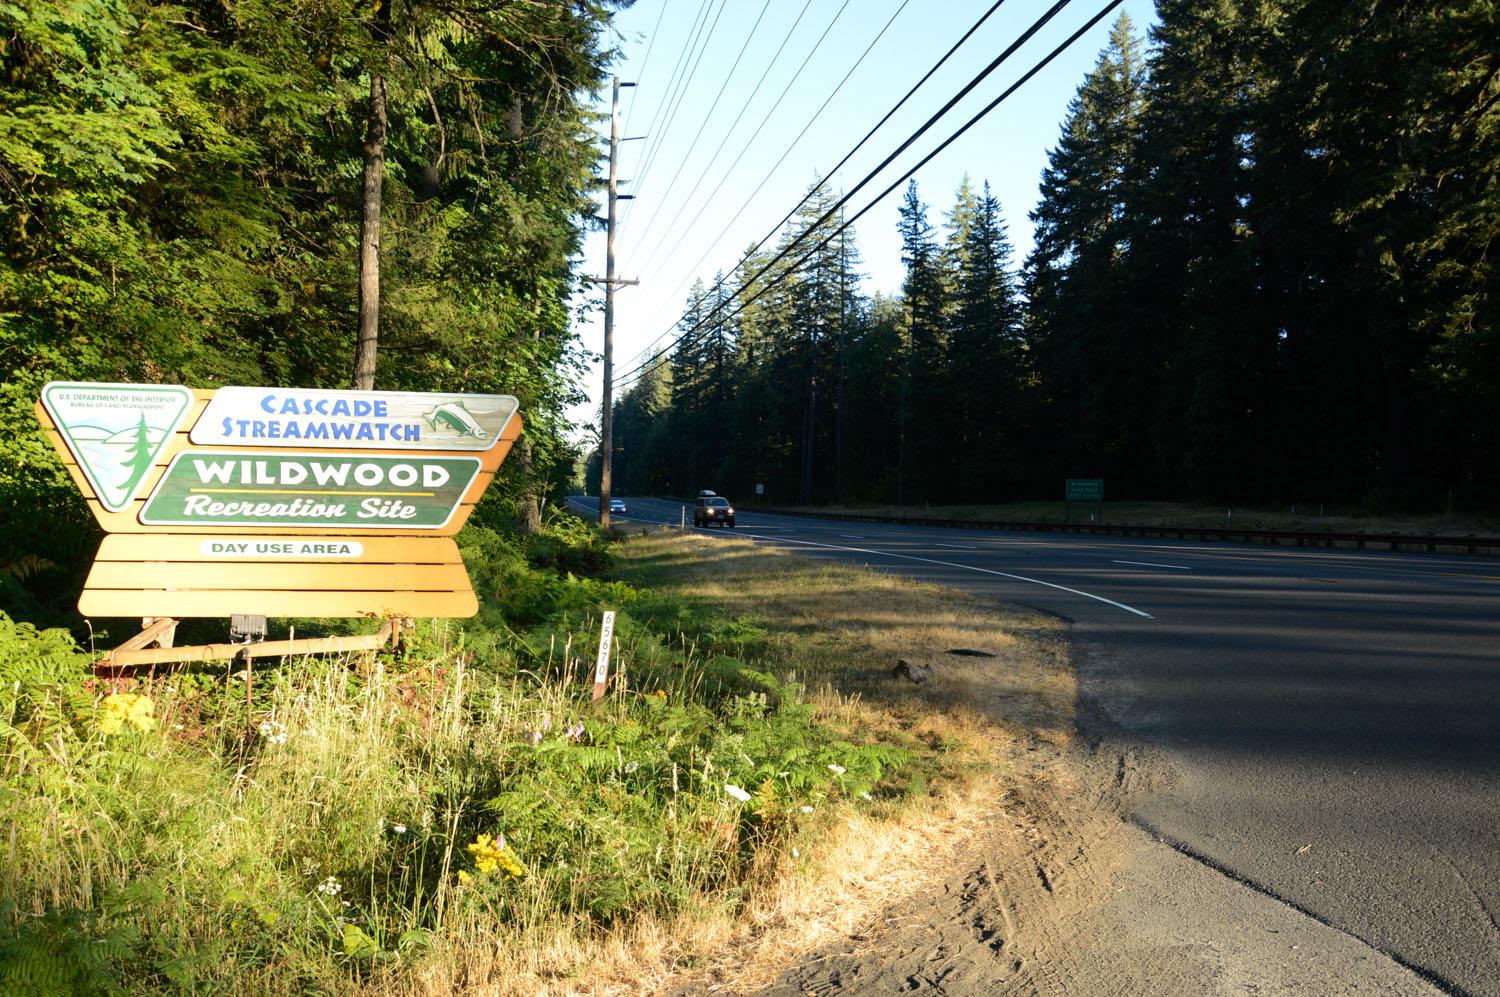 The sacred site at issue is known as Ana Kwna Nchi Nchi Patat (the “Place of Big Big Trees”) along Highway 26 near Mount Hood in Oregon. Photo courtesy of the Becket Fund for Religious Liberty